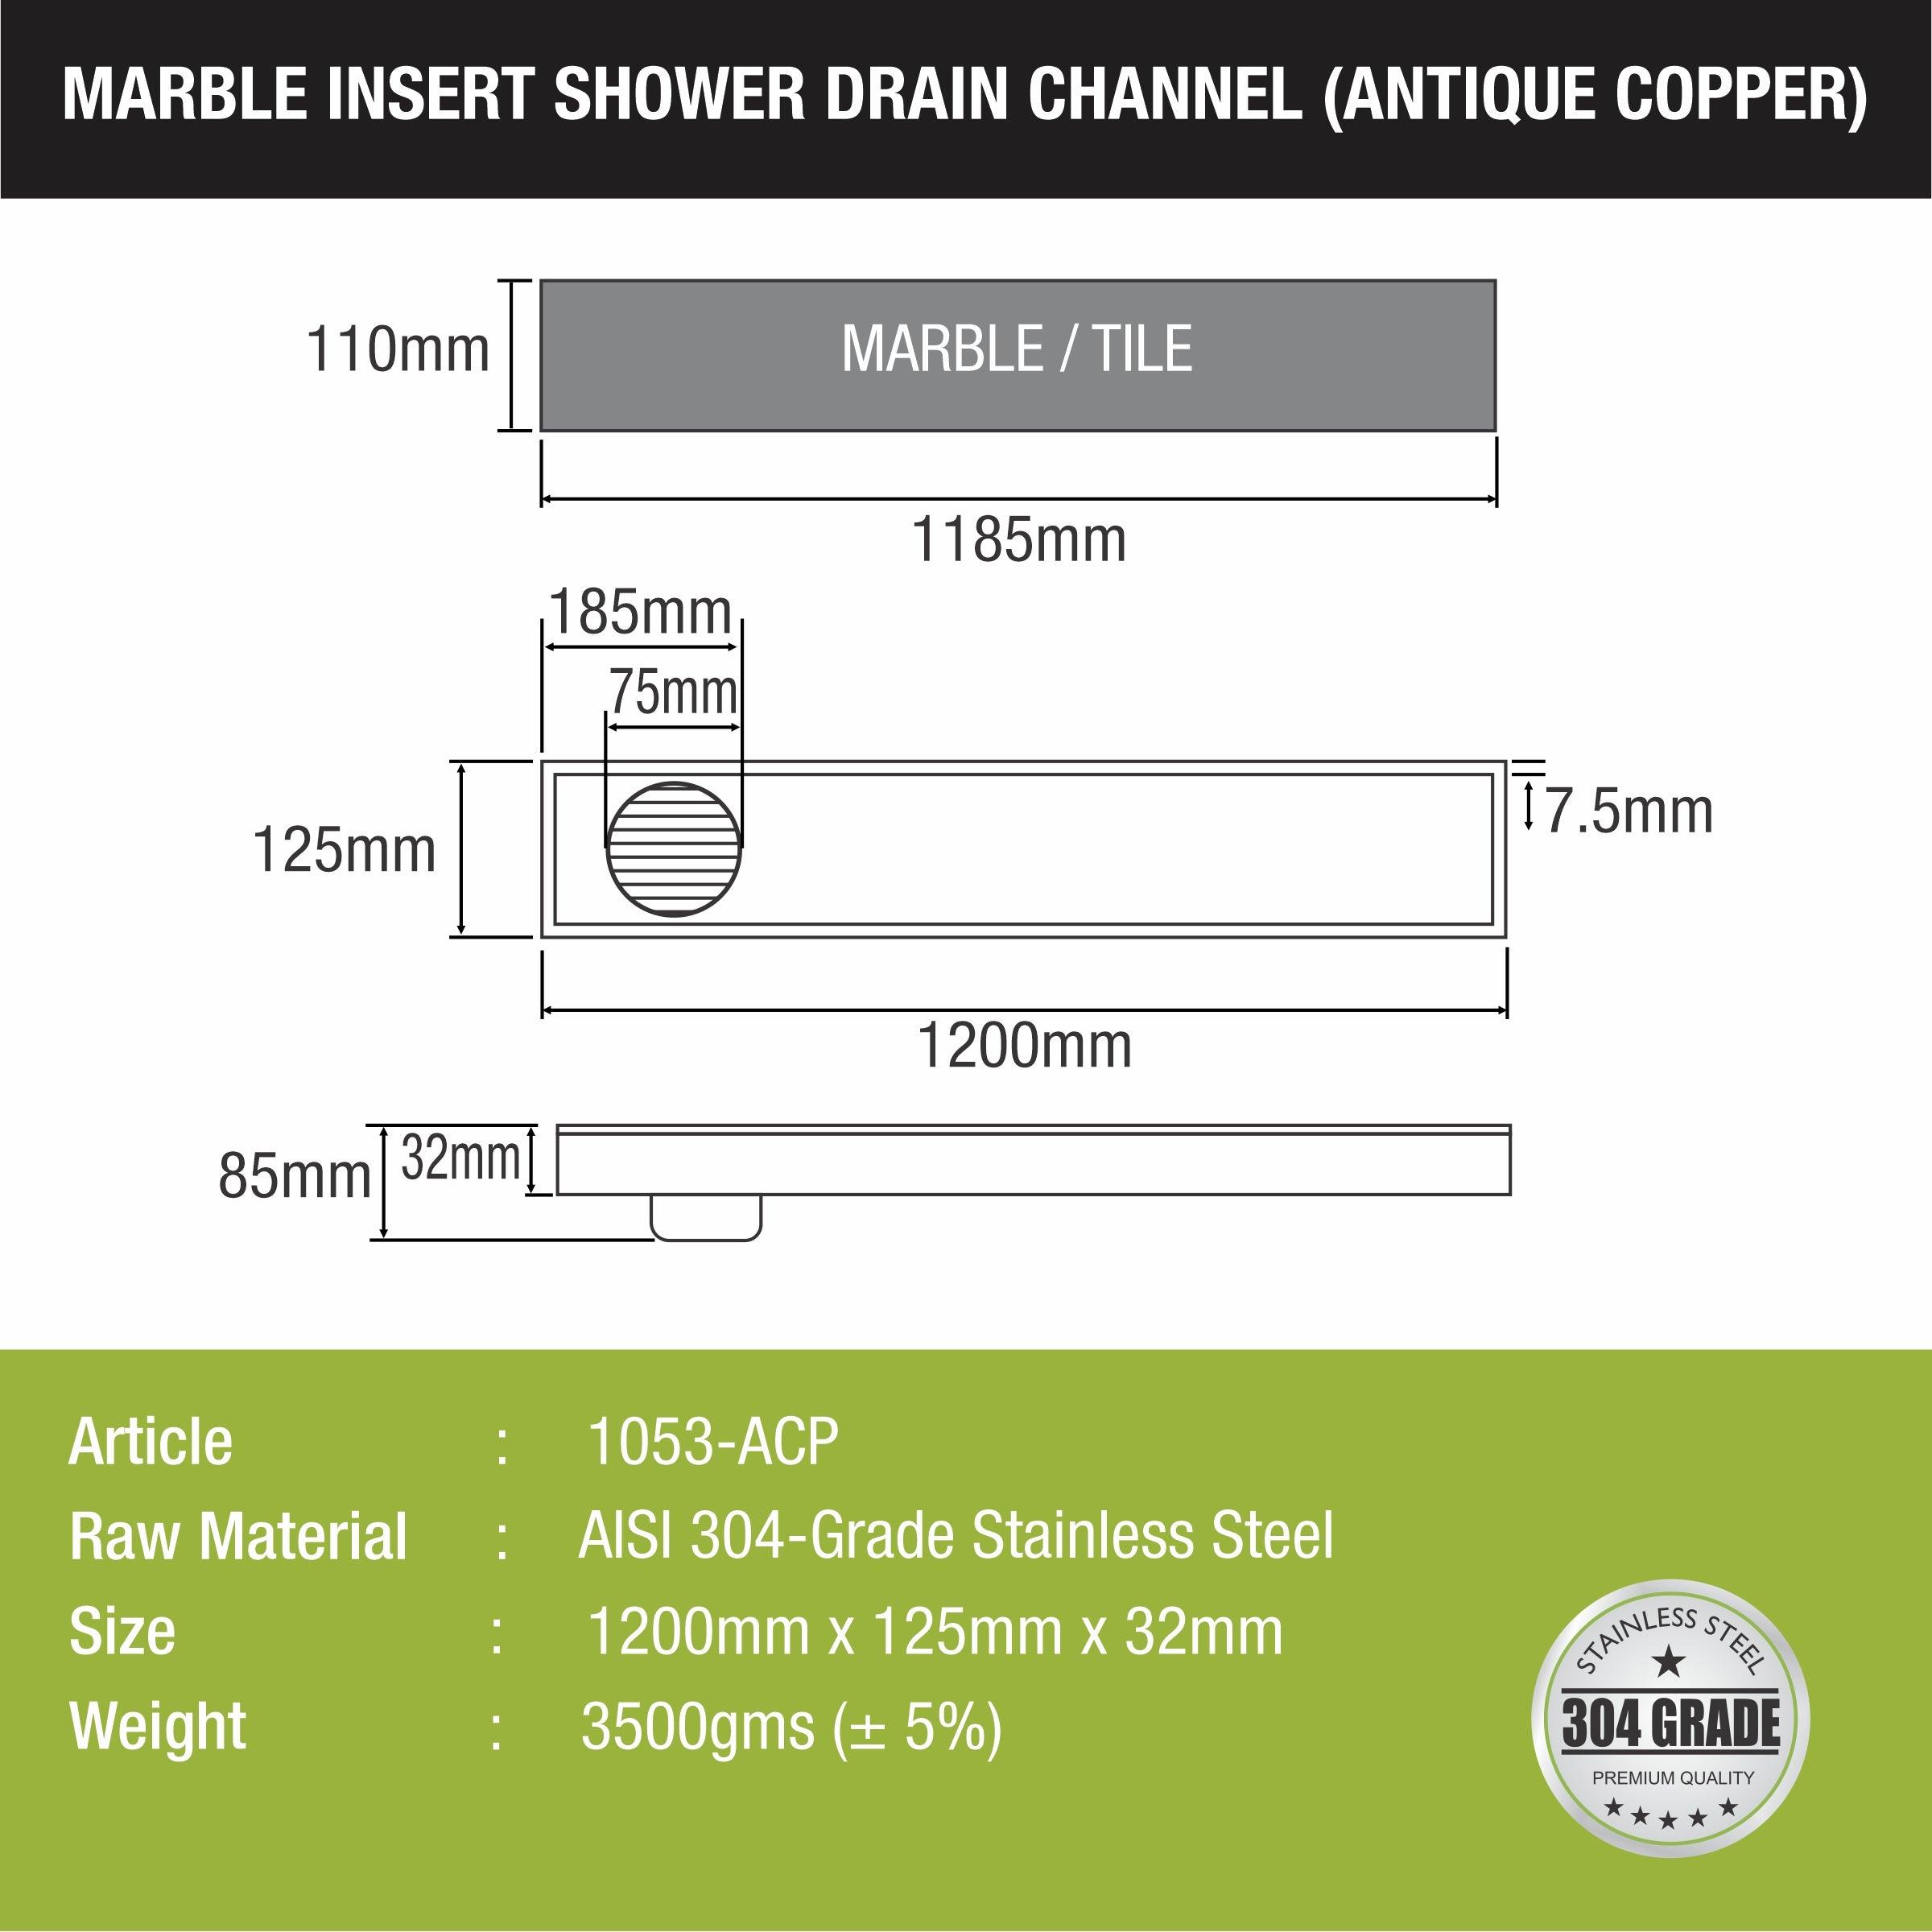 Marble Insert Shower Drain Channel - Antique Copper (48 x 5 Inches) sizes and dimensions